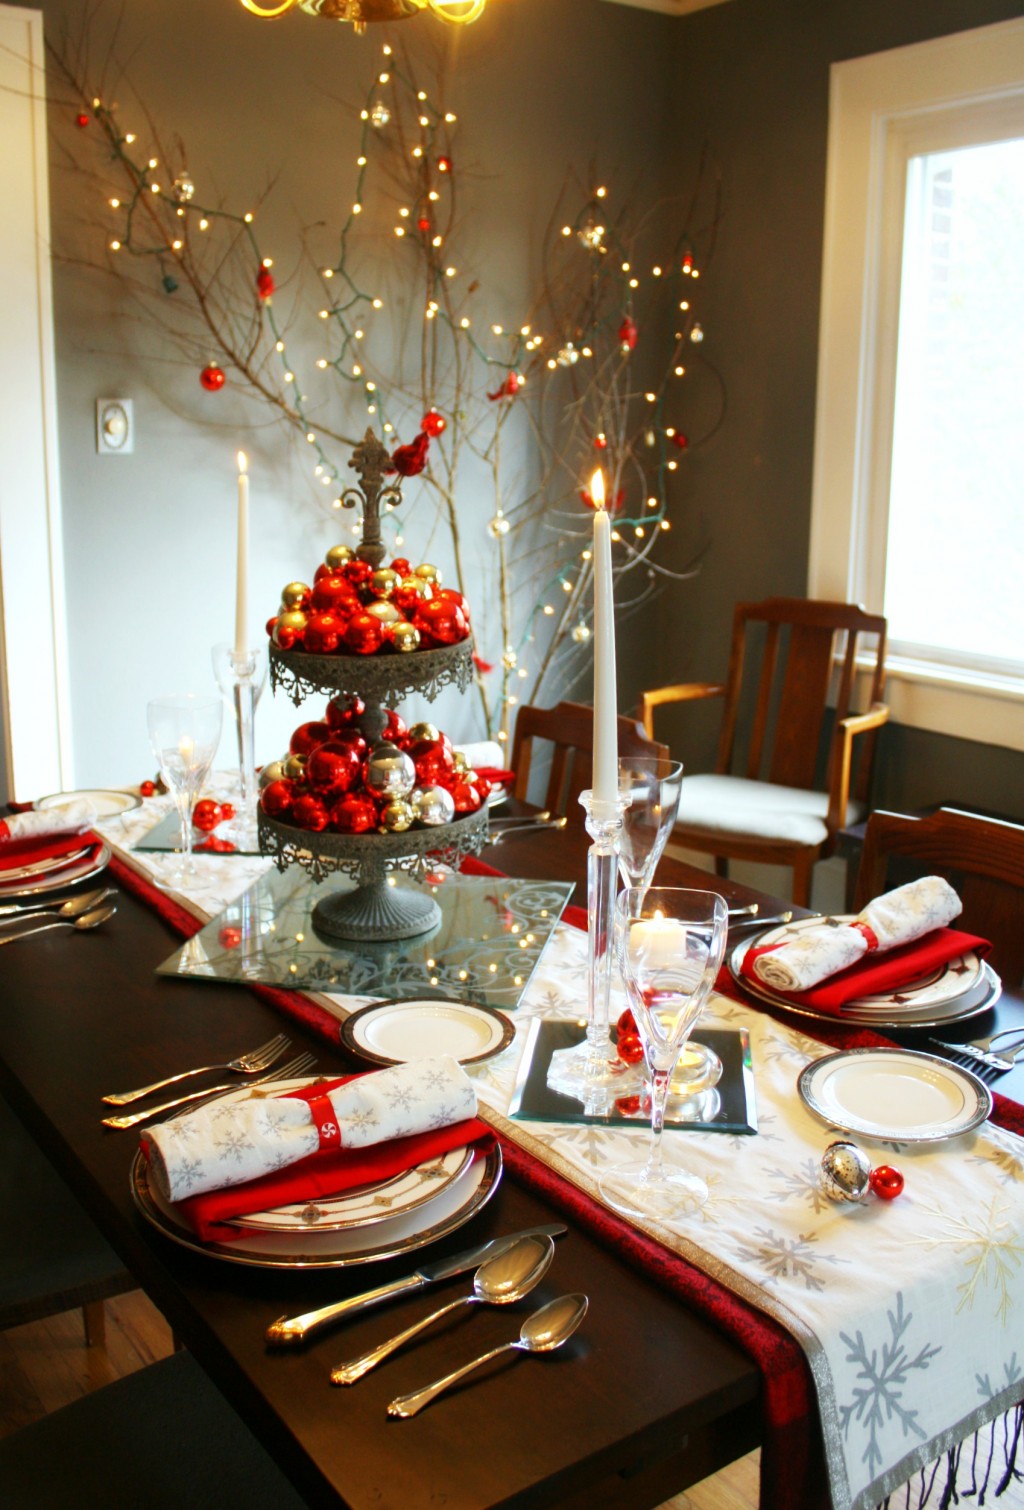 uncategorized-clean-holiday-dinner-table-decoration-ideas-christmas-dinner-table-decoration-ideas-christmas-dining-room-table-decoration-ideas-christmas-dinner-table-decoration-ideas-pinterest-pi-